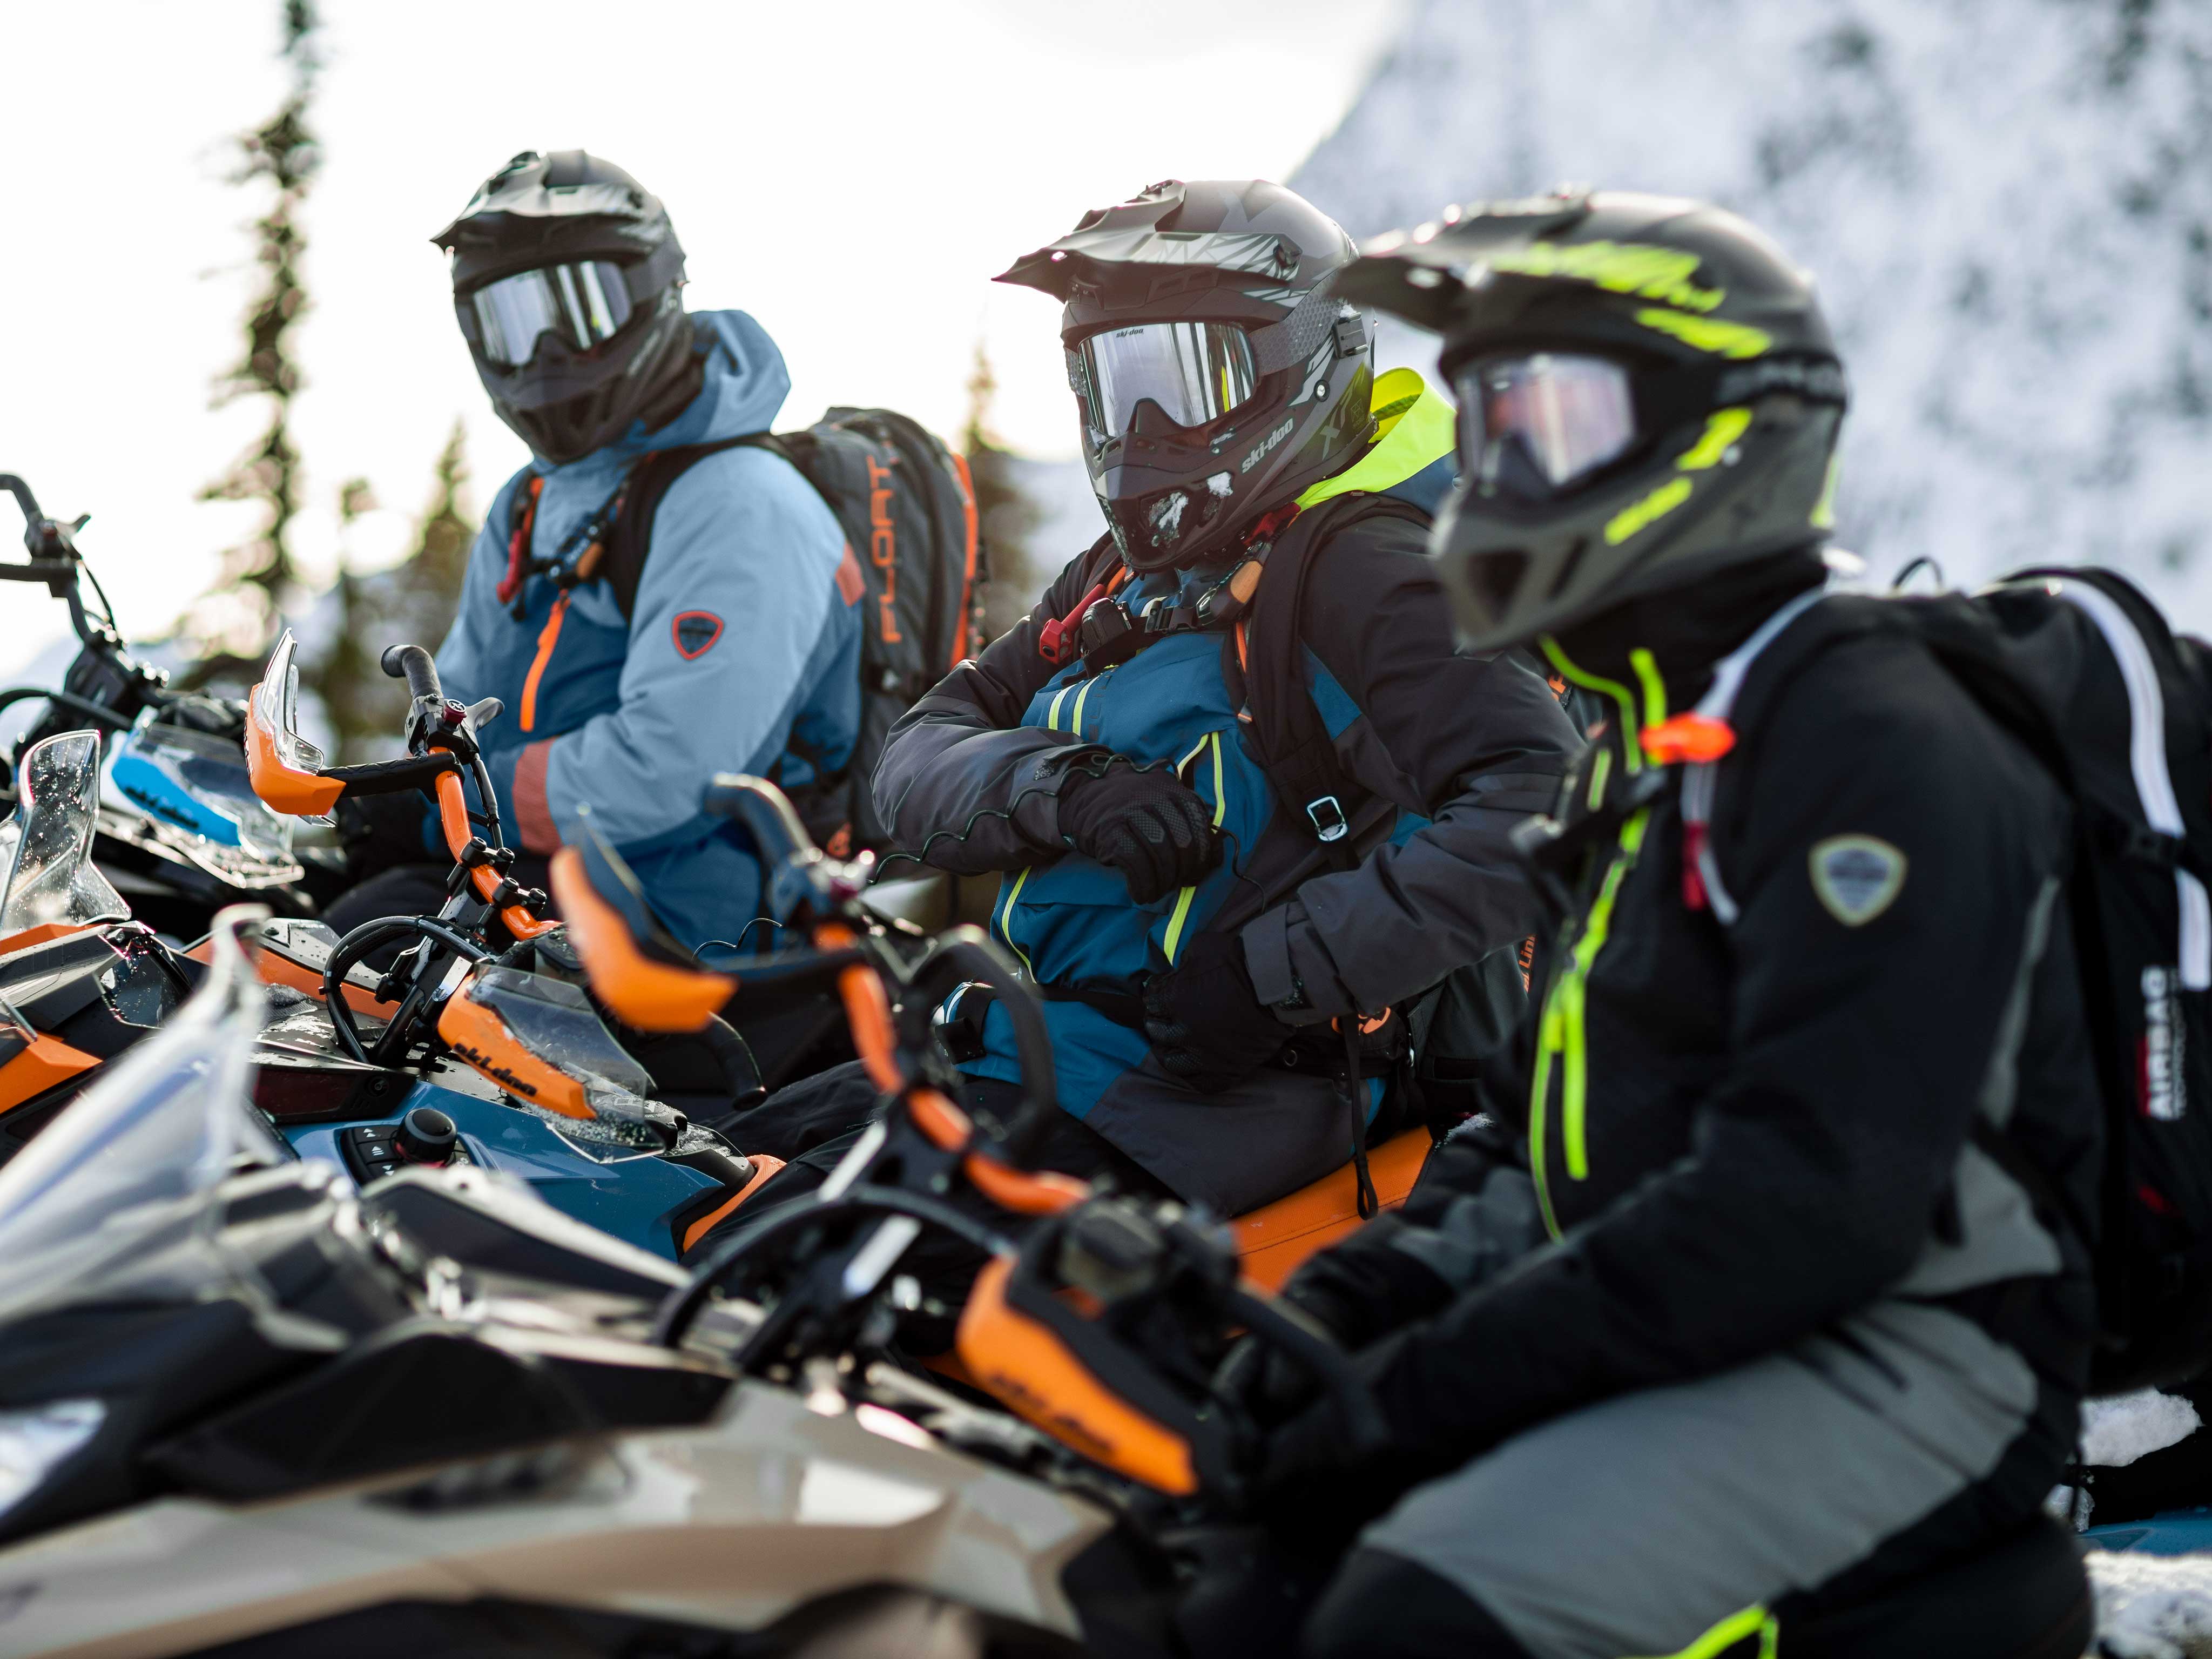 Group of riders with their 2022 Ski-Doo Backcountry